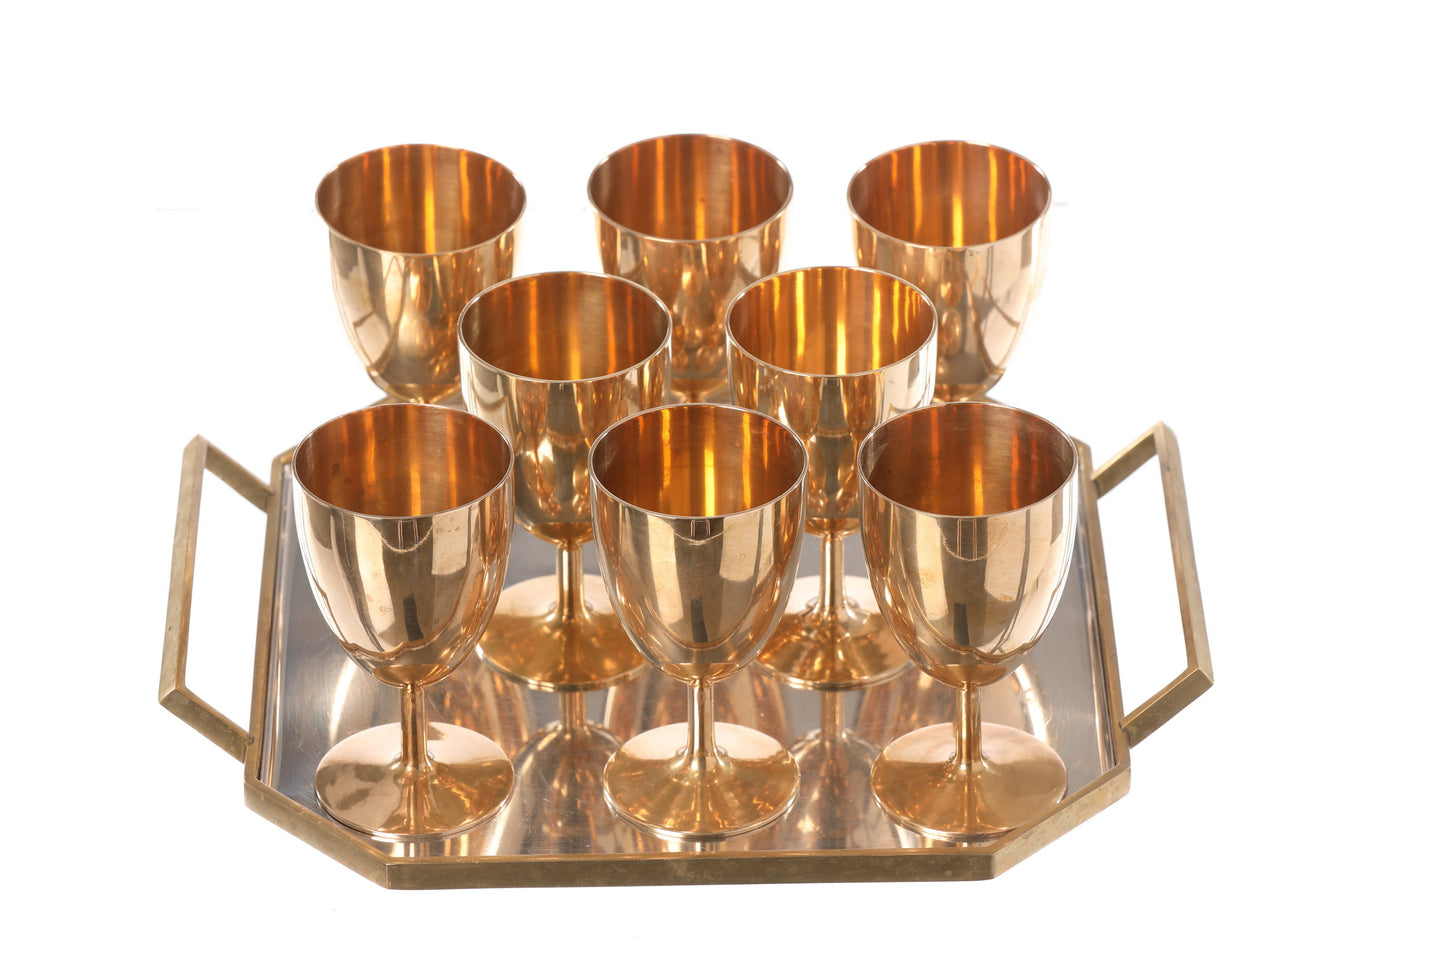 Goblet set with brass tray